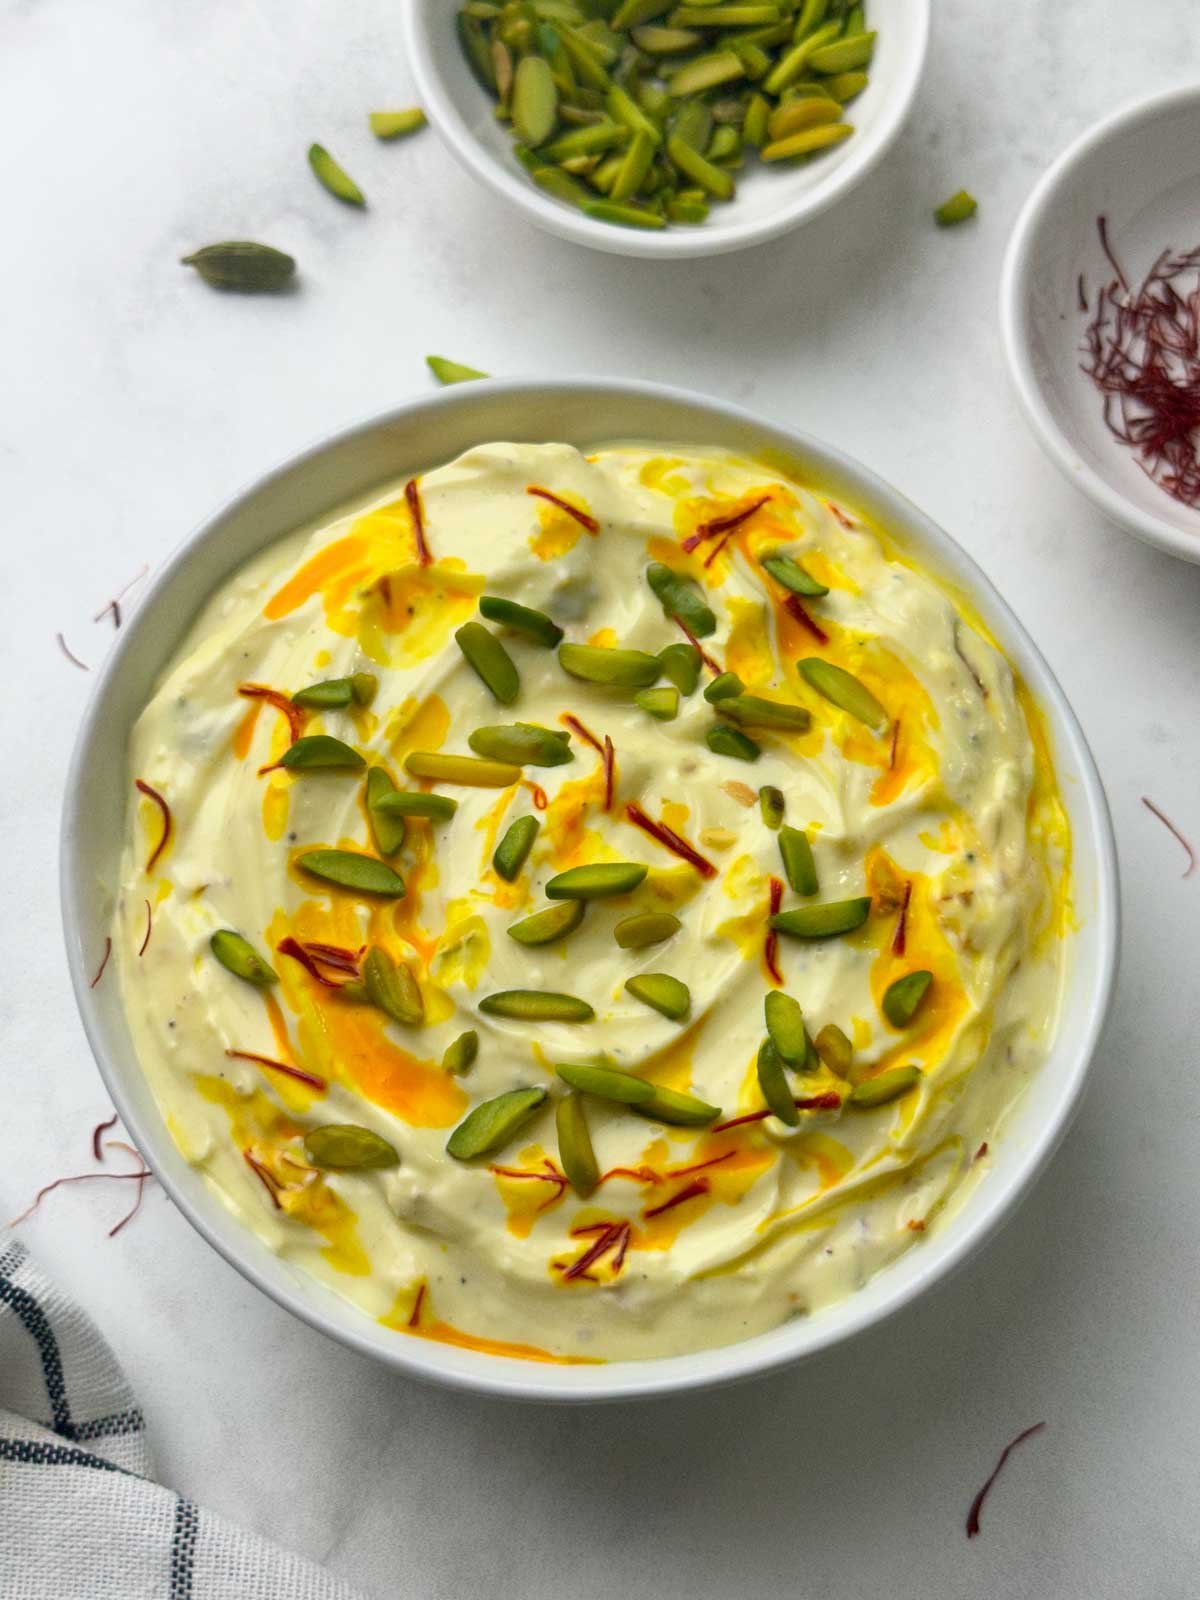 shrikhand served in a bowl with poori, pista and saffron strands on the side